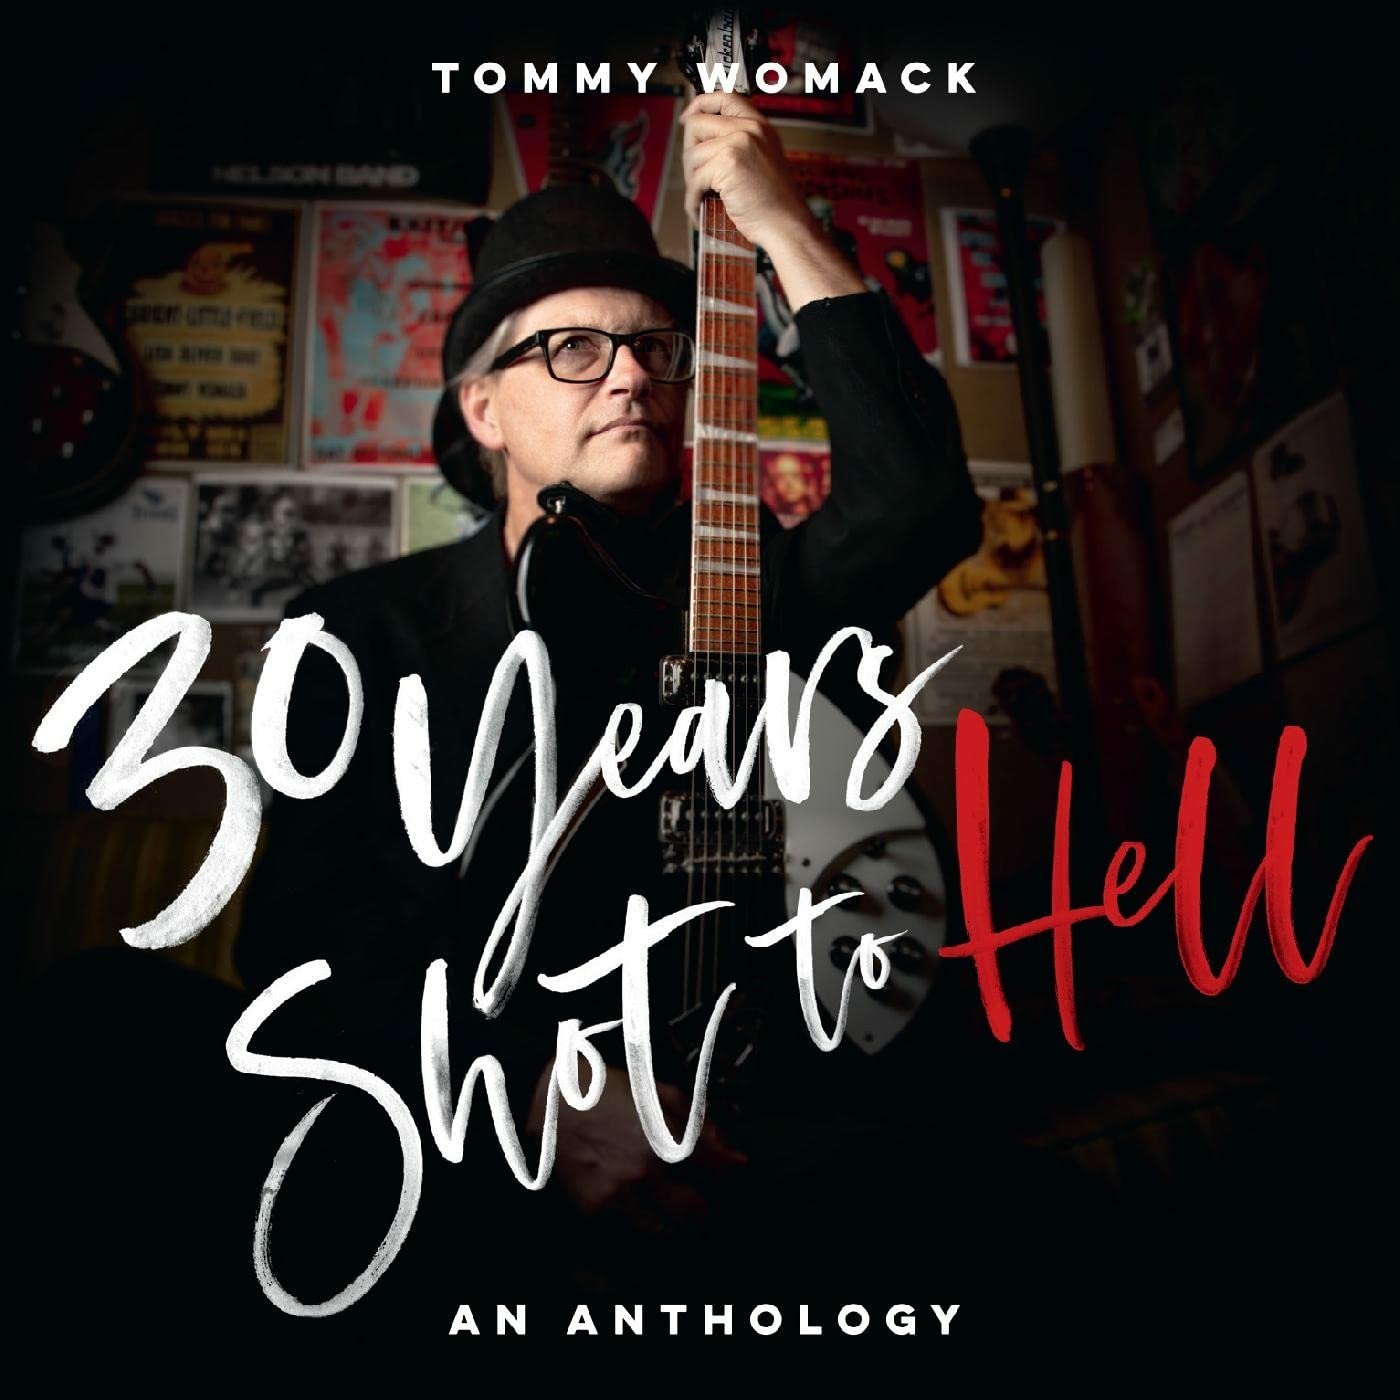 CD Shop - WOMACK, TOMMY 30 YEARS SHOT TO HELL: A TOMMY WOMACK ANTHOLOGY